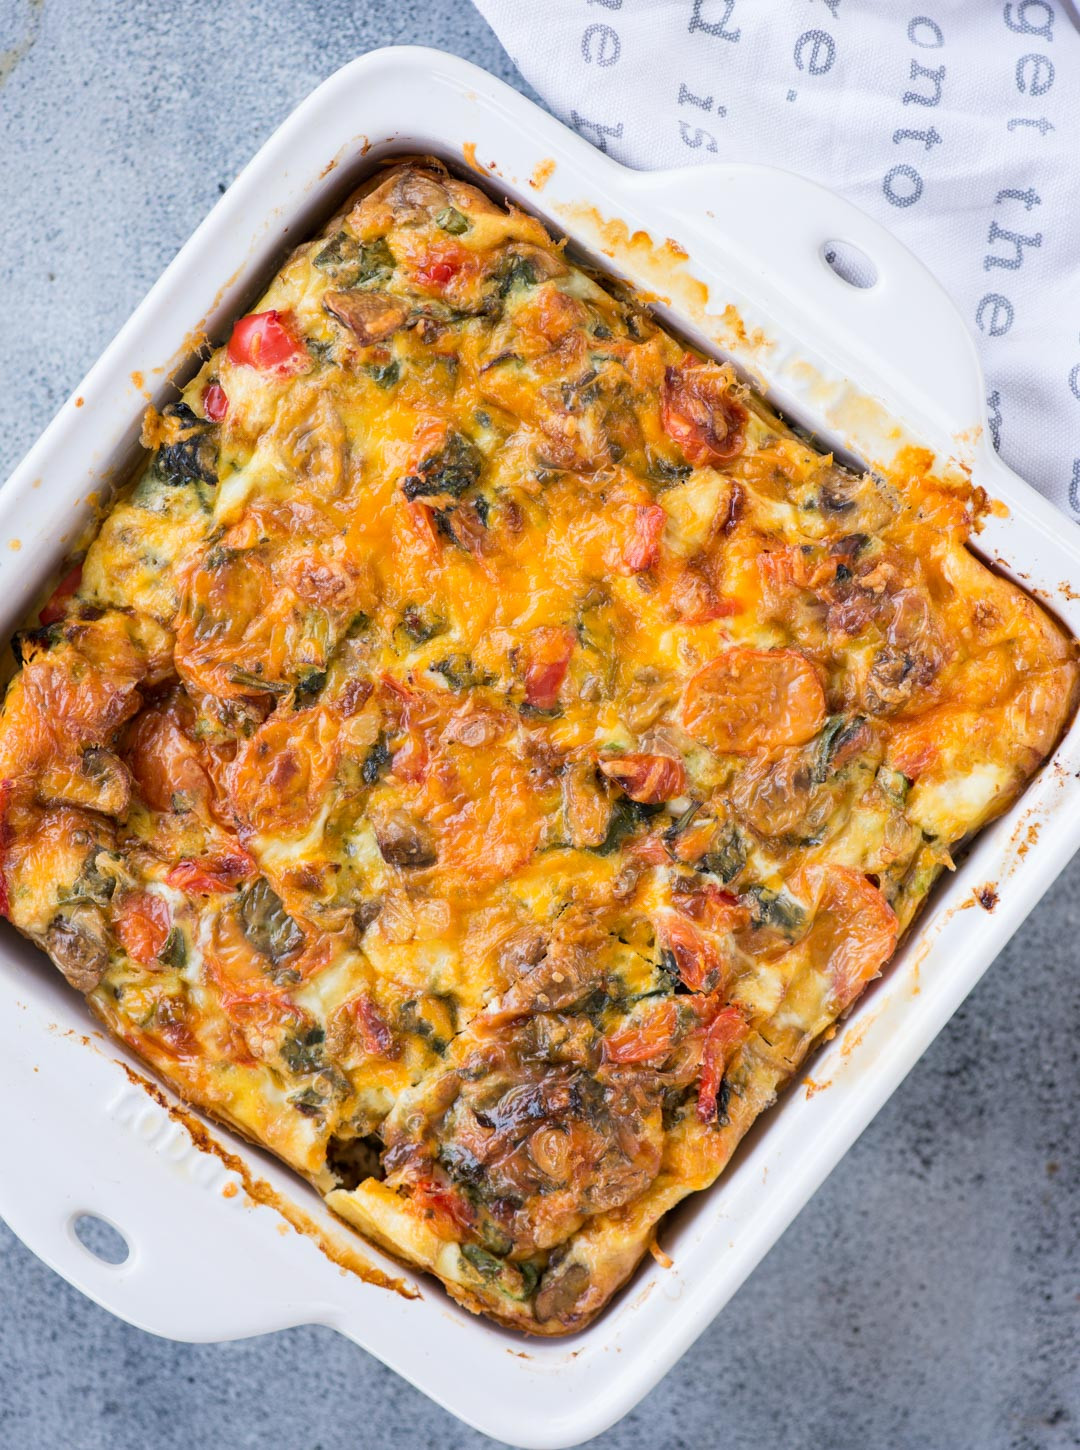 15 Recipes for Great Egg Casserole with Bread